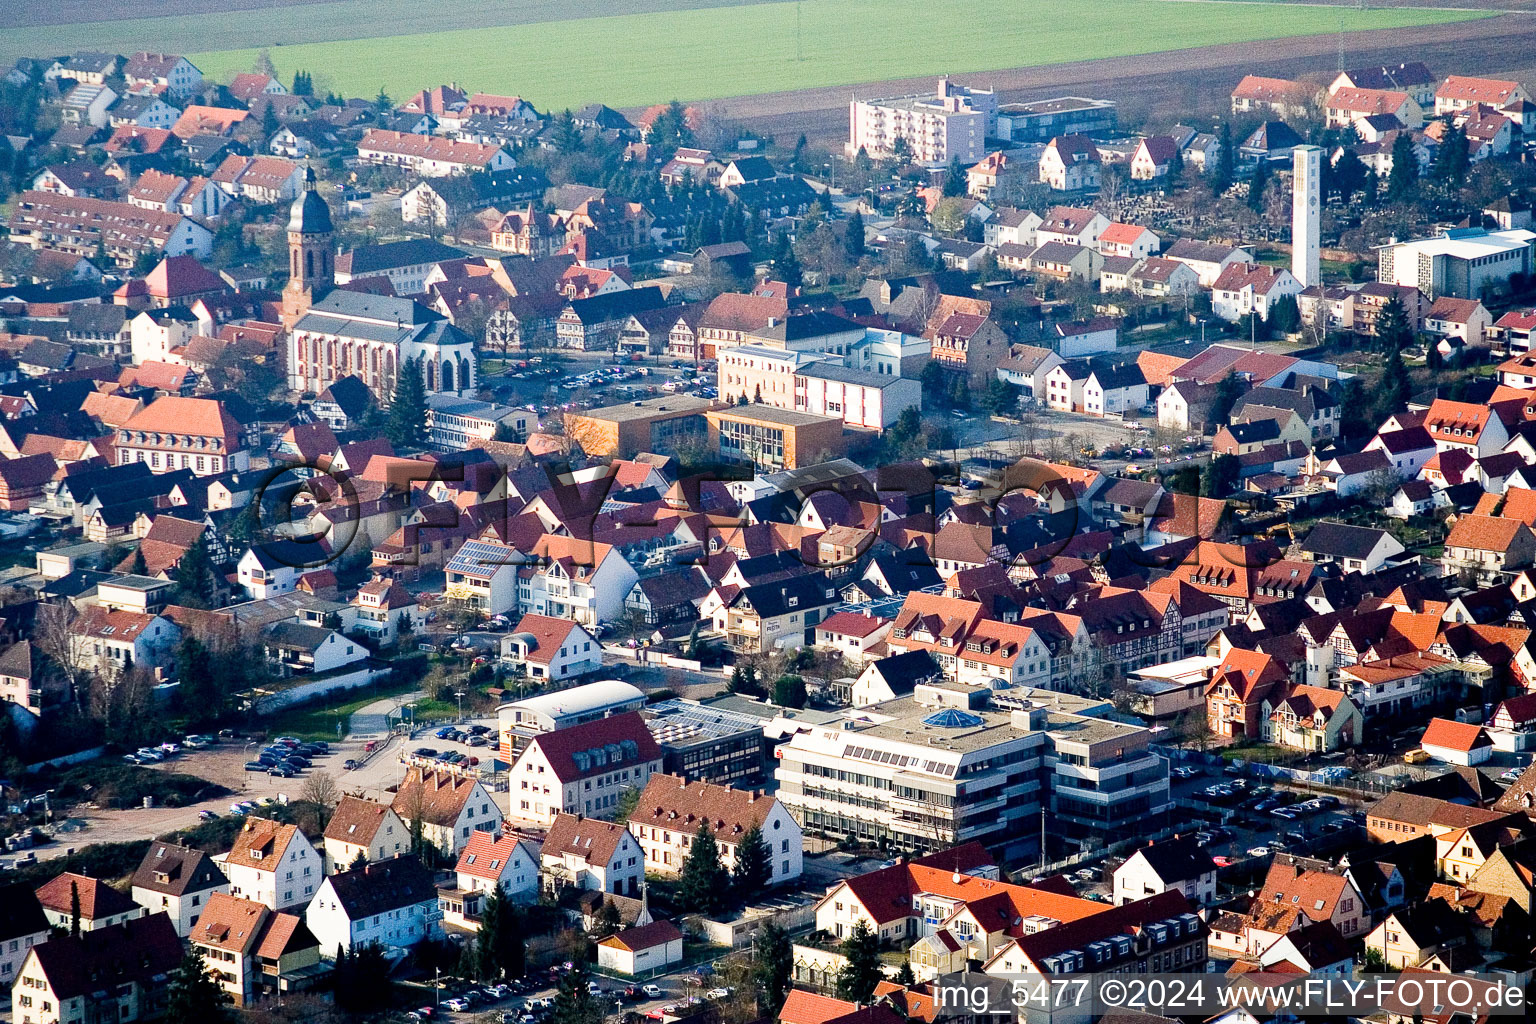 Town View of the streets and houses of the residential areas in Kandel in the state Rhineland-Palatinate from above